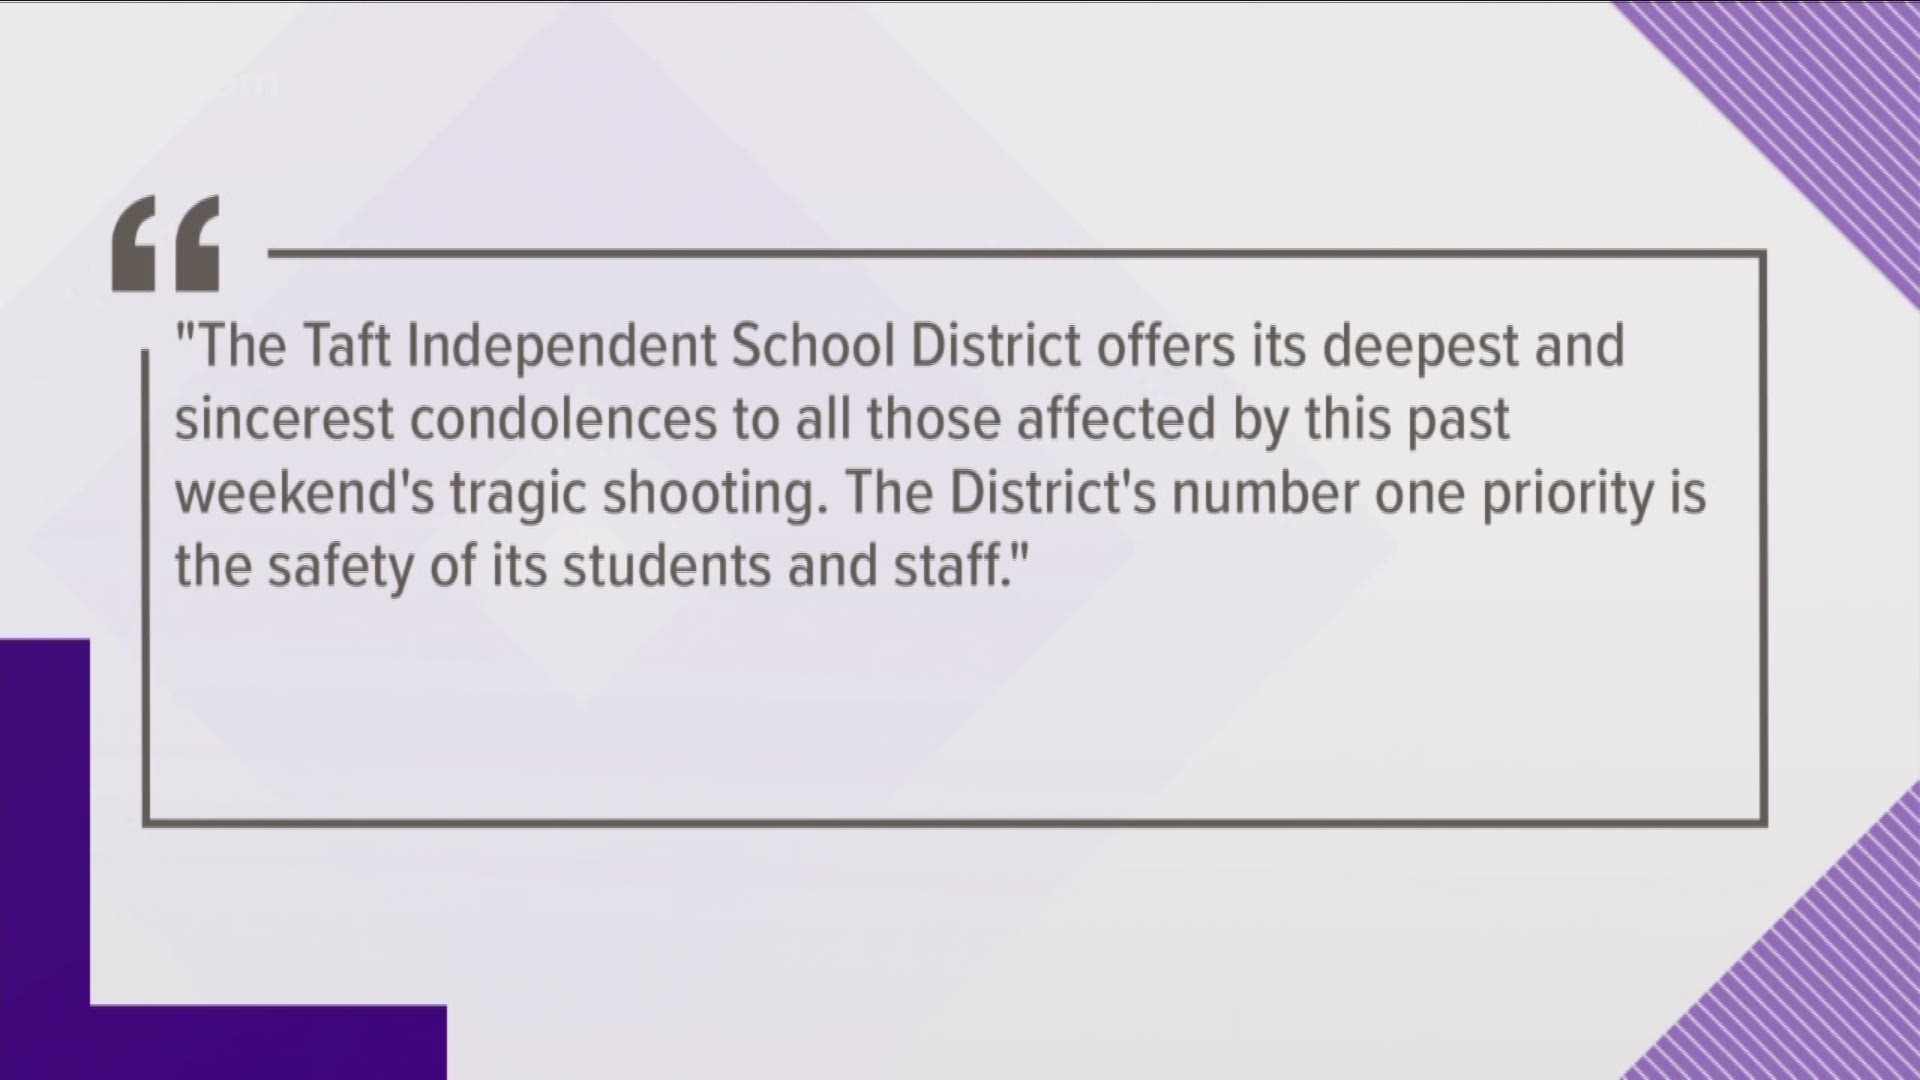 Statement from Taft ISD regarding the shooting on October 13th.